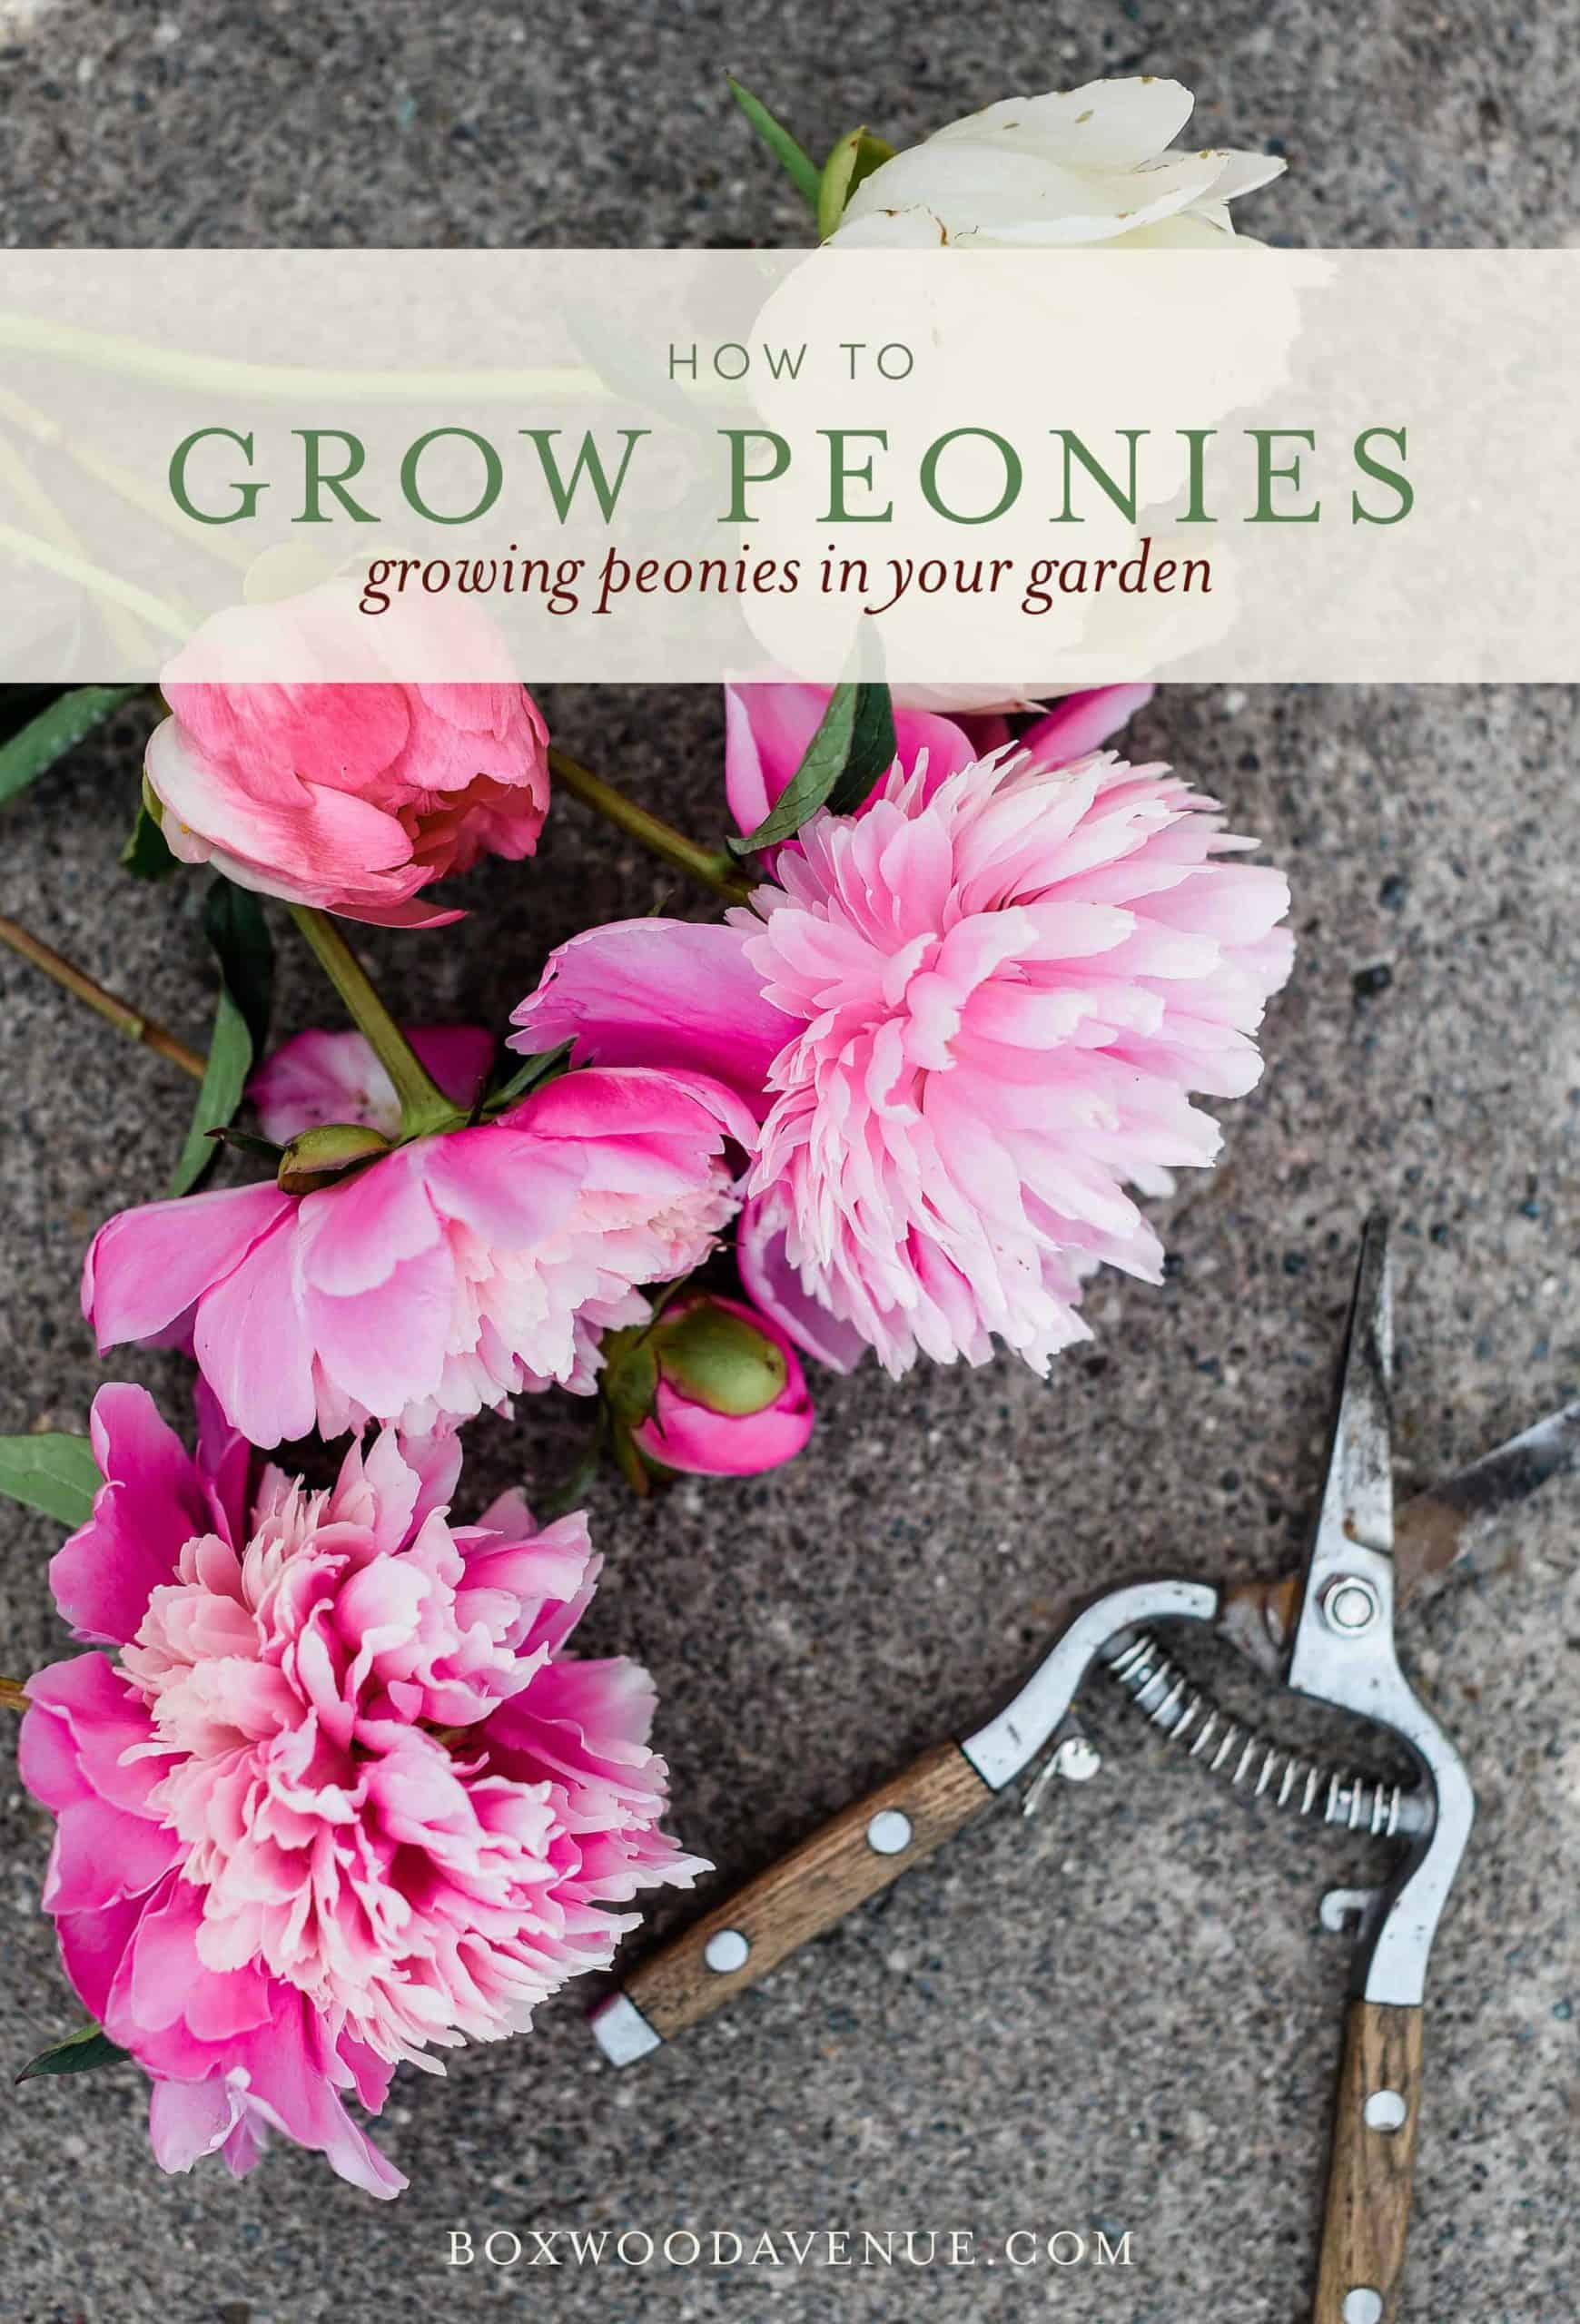 Growing peonies in your garden is a wonderful way to have beautiful cut flowers in the spring! Learn how to grow your own peonies with this simple guide!